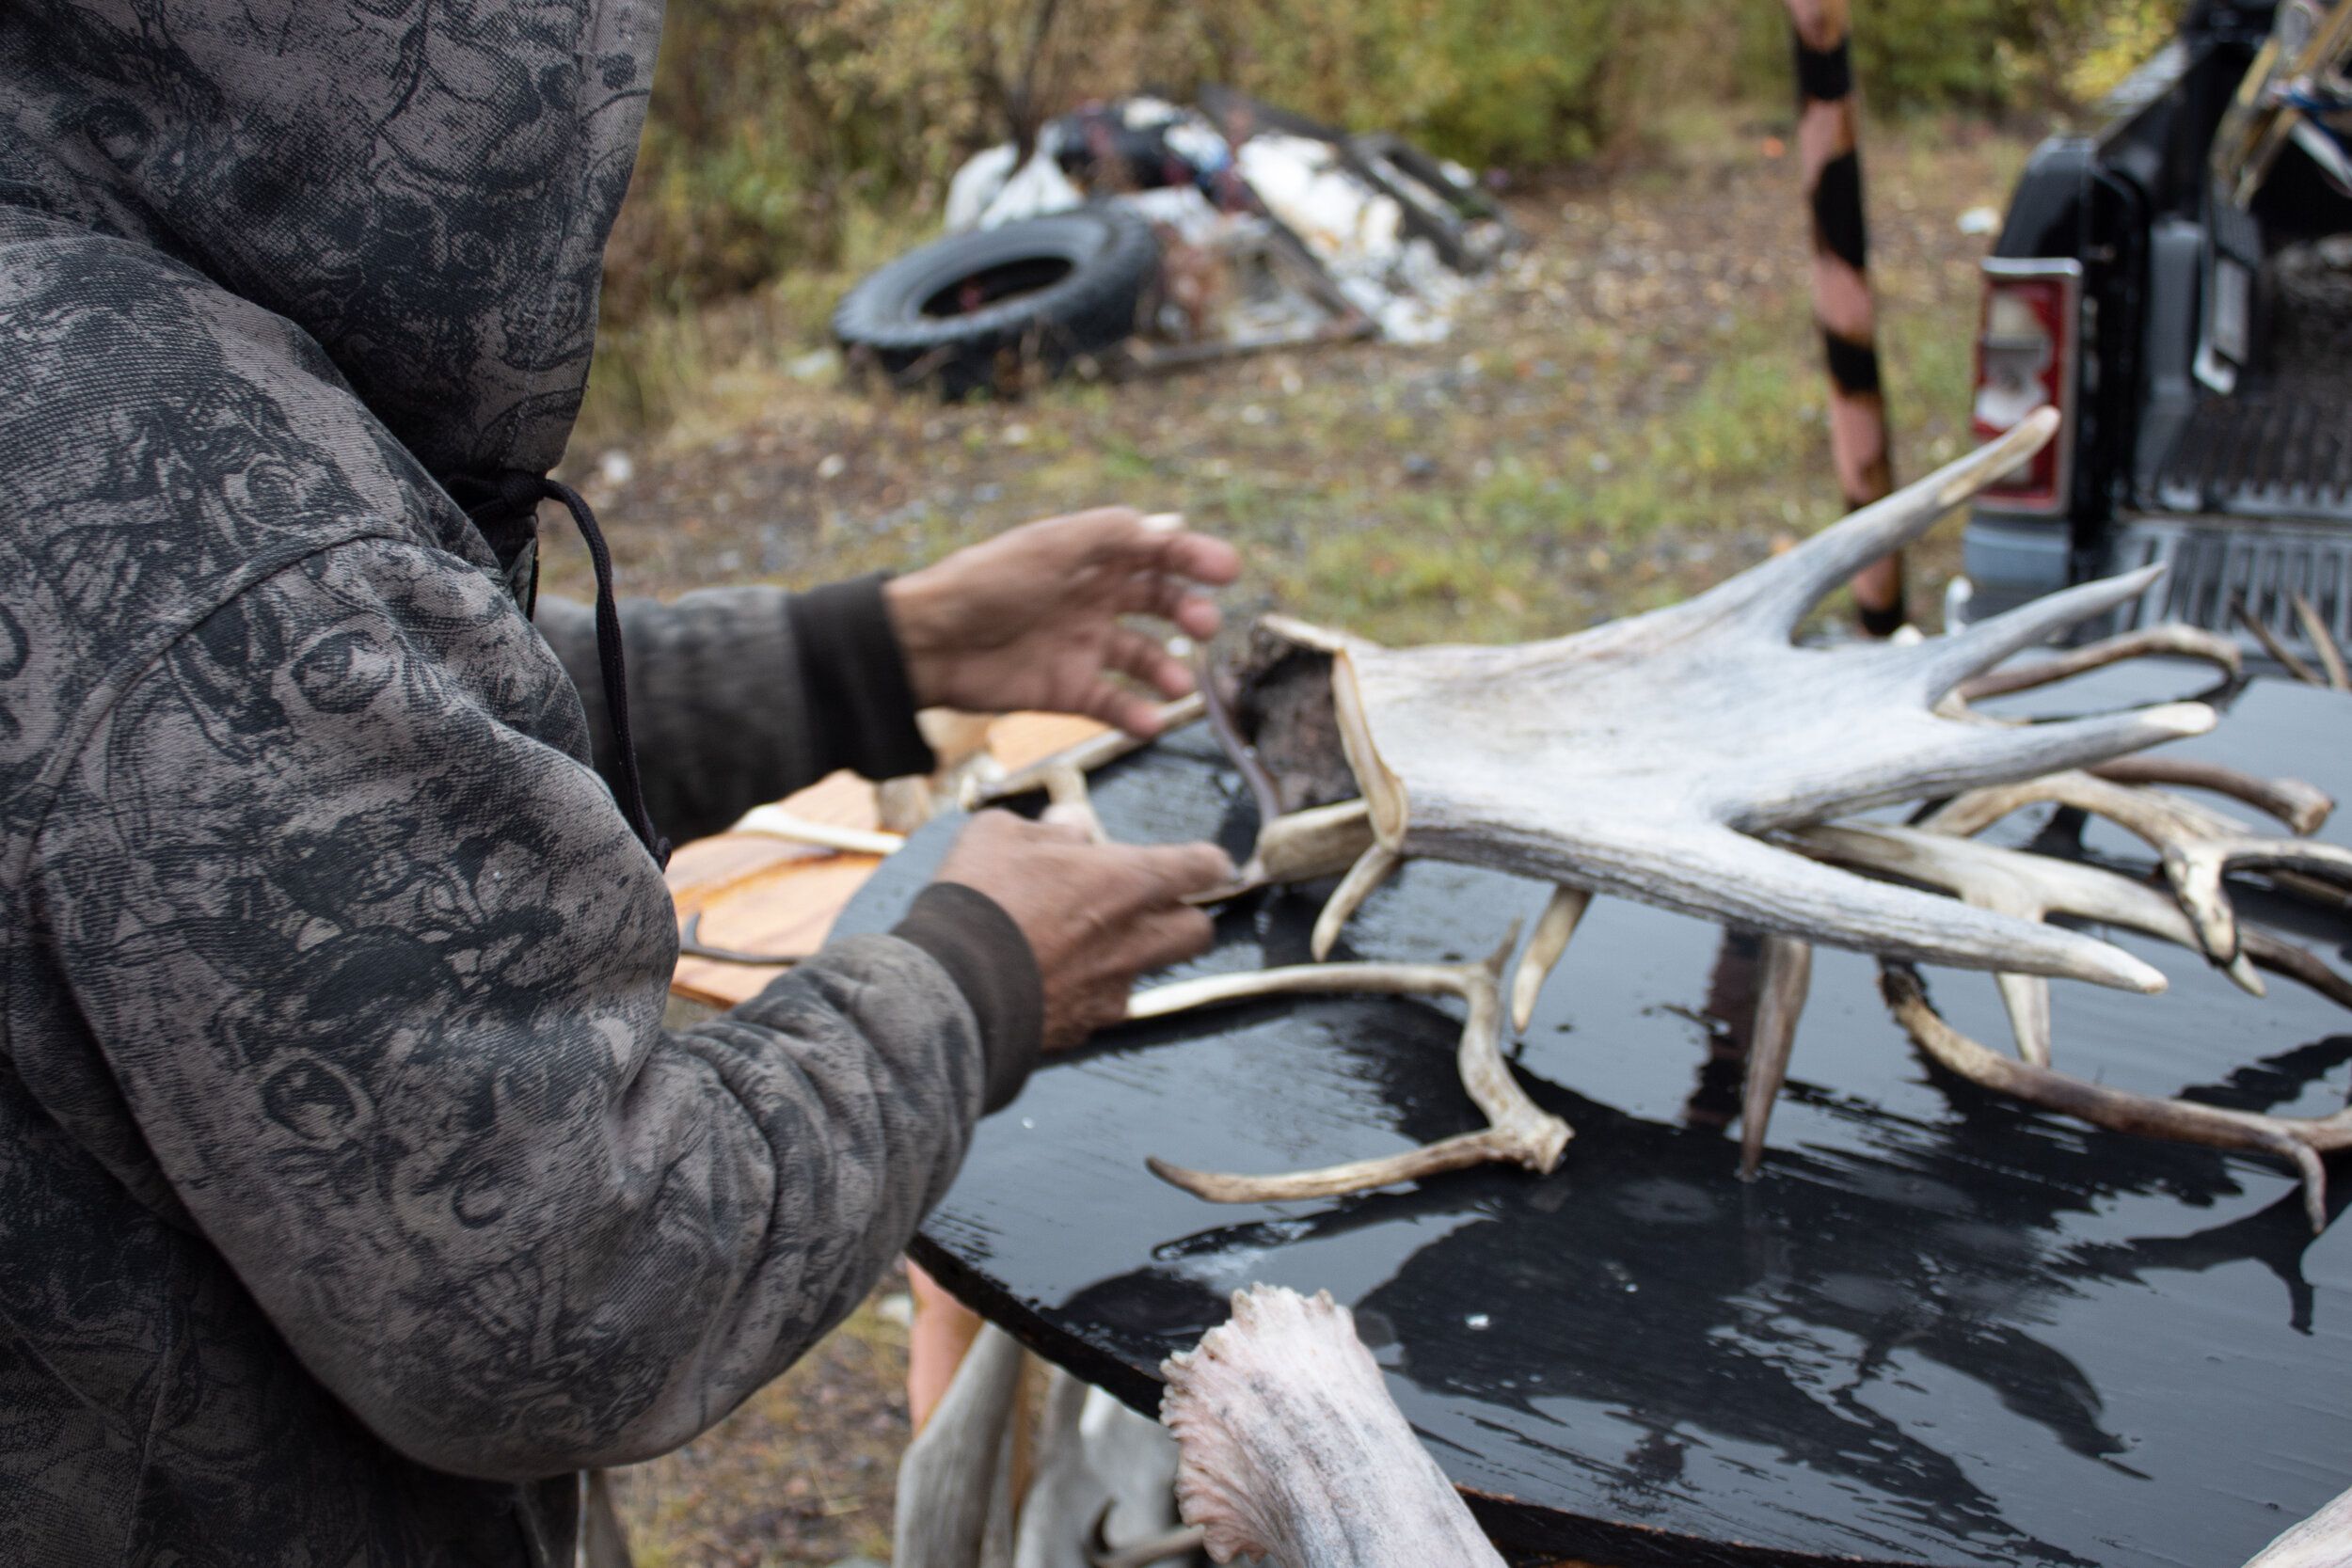 Gideon James uses caribou antlers to make jewelry and other art. Image by Amy Martin. United States, 2019.